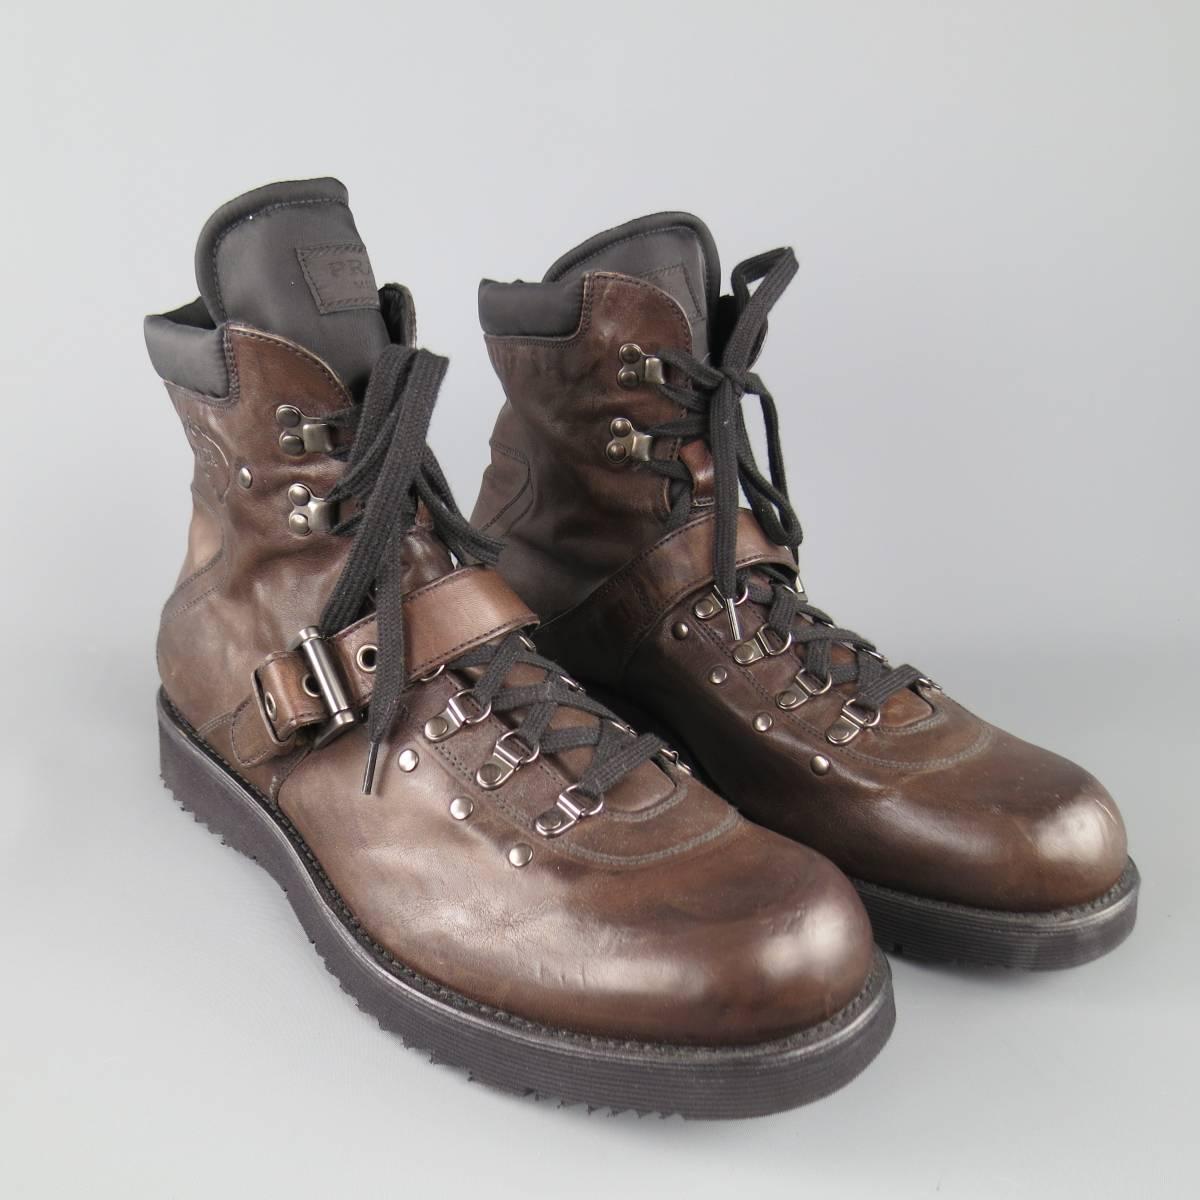 PRADA hiking style boots in a chocolate brown leather featuring dark silver tone sky hooks, strap with buckle, thick rubber sole, and black nylon ankle and tongue. Made in Italy.
 
Excellent Pre-Owned Condition.
Marked: UK 12
 
Outsole: 13 x 5